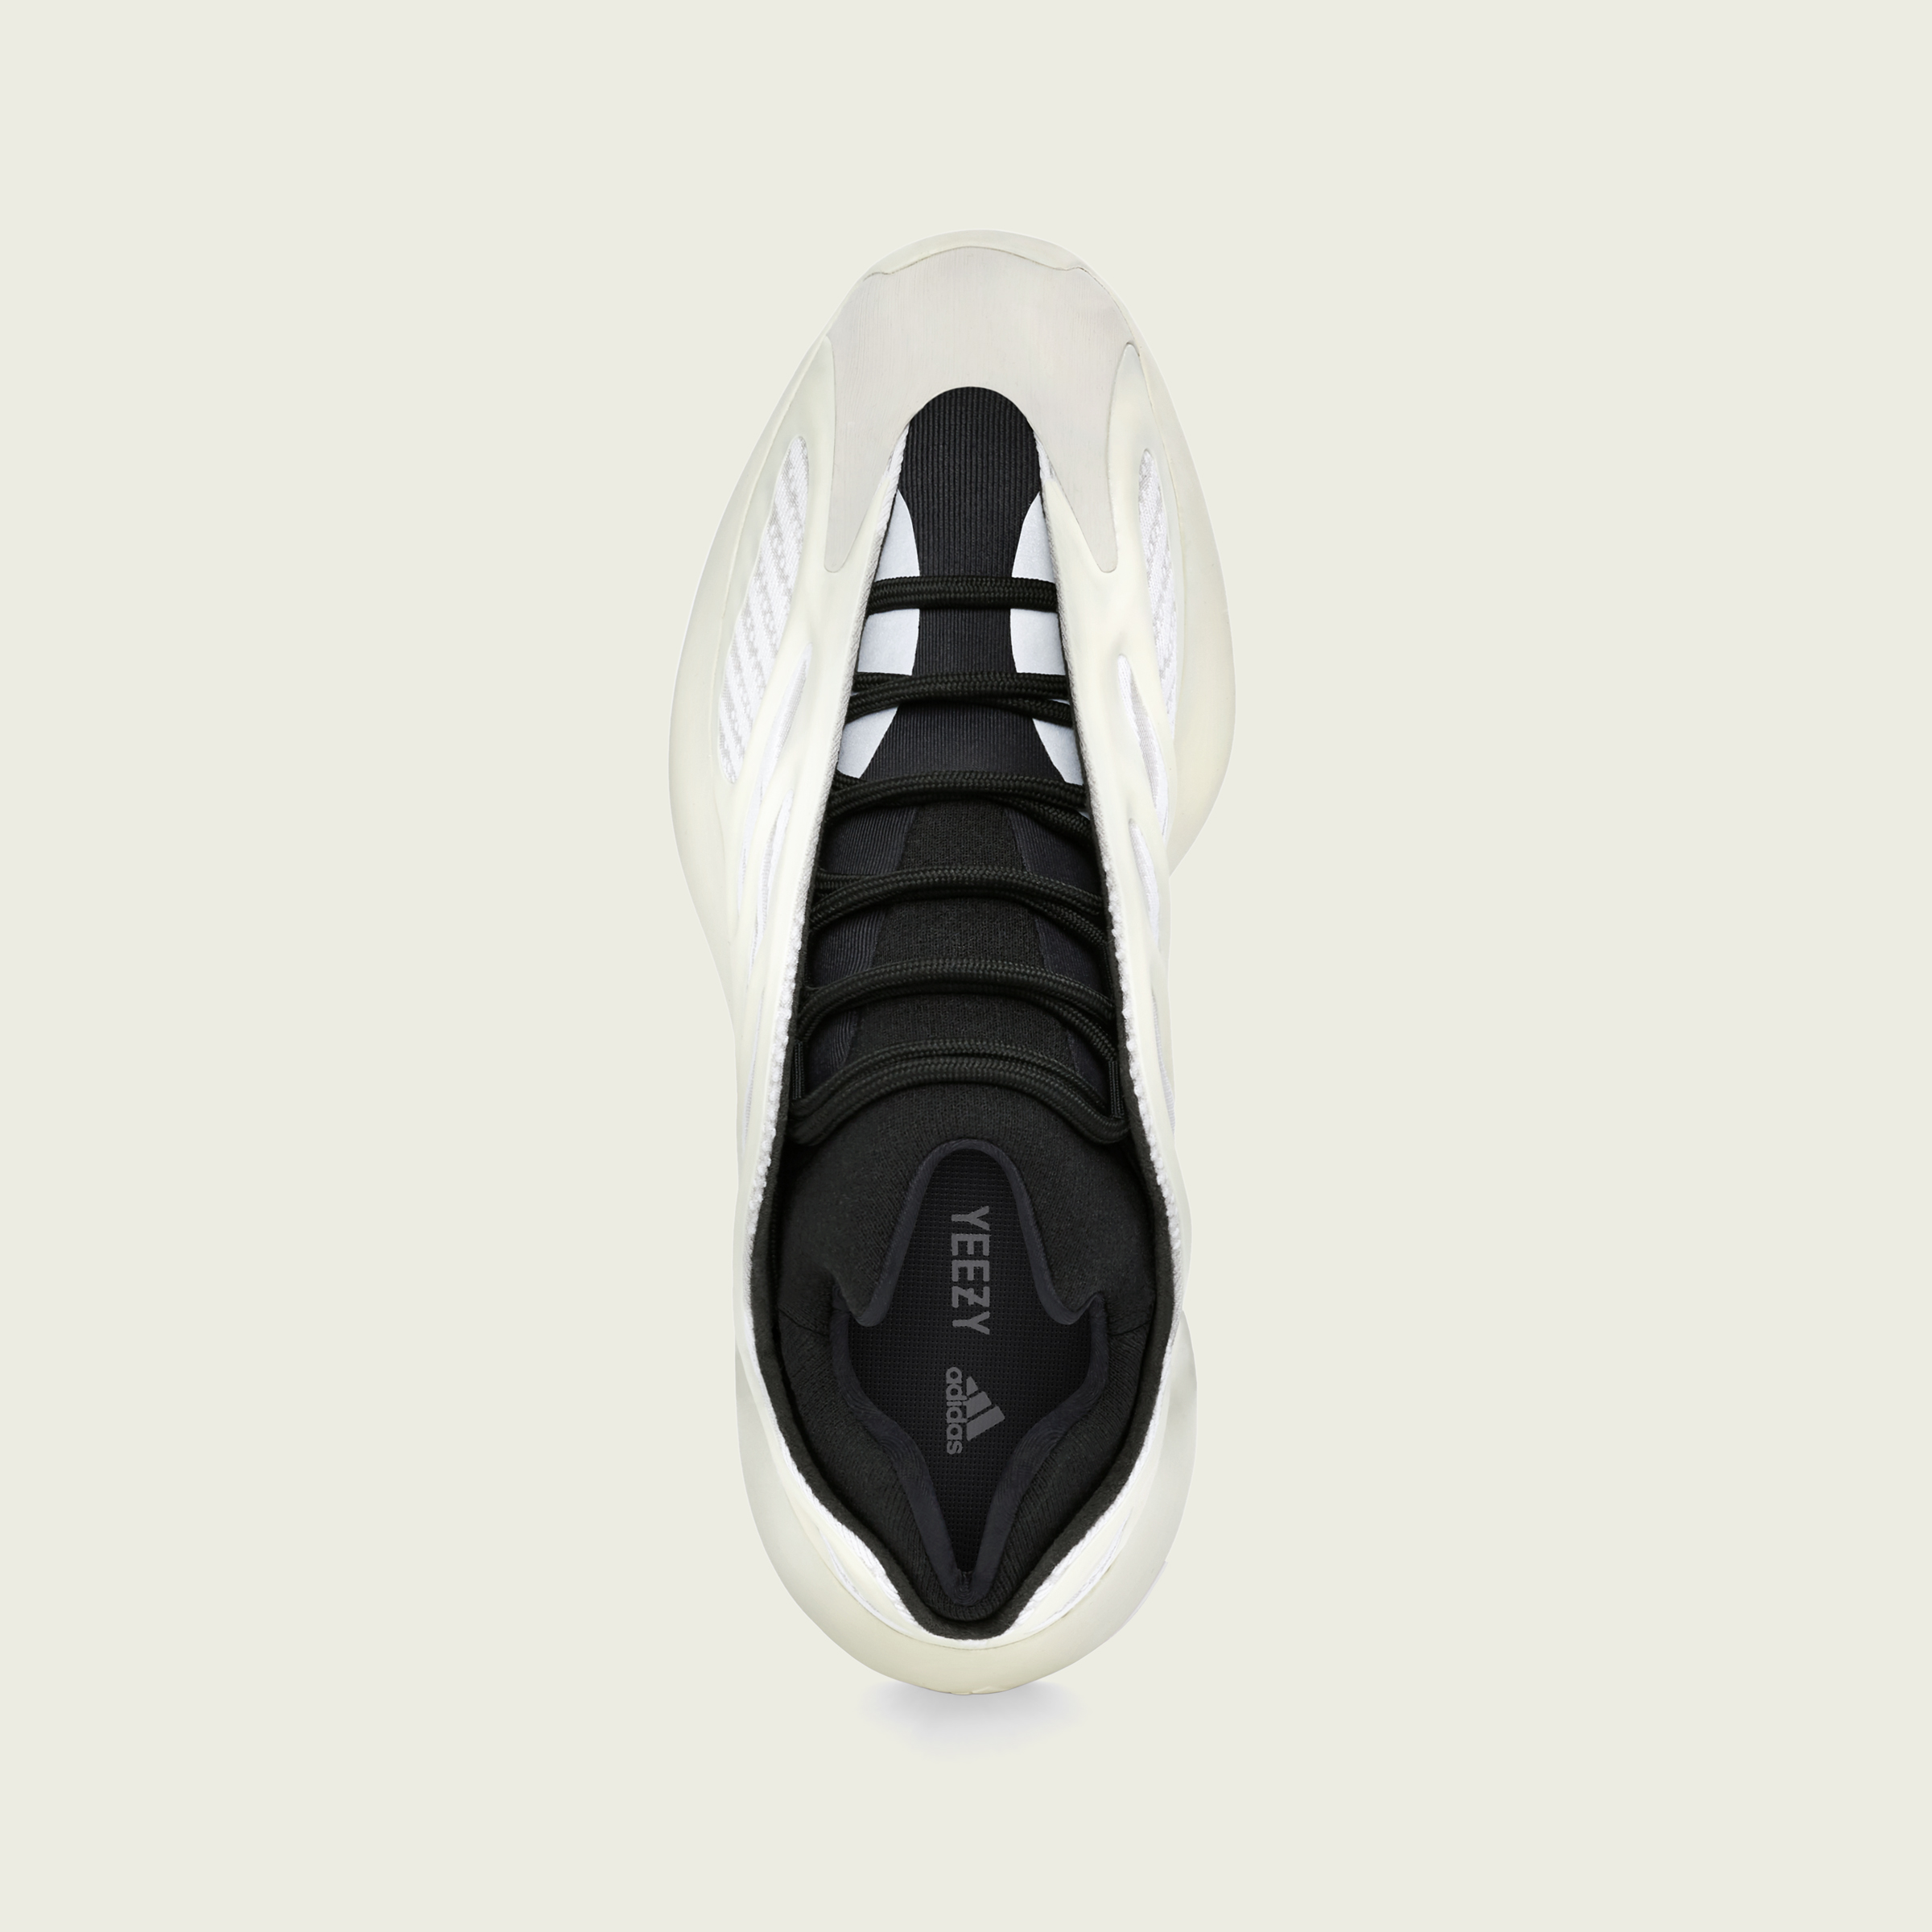 adidas YEEZY Boost 700 v3 'Azael' - Register Now on END. (US 